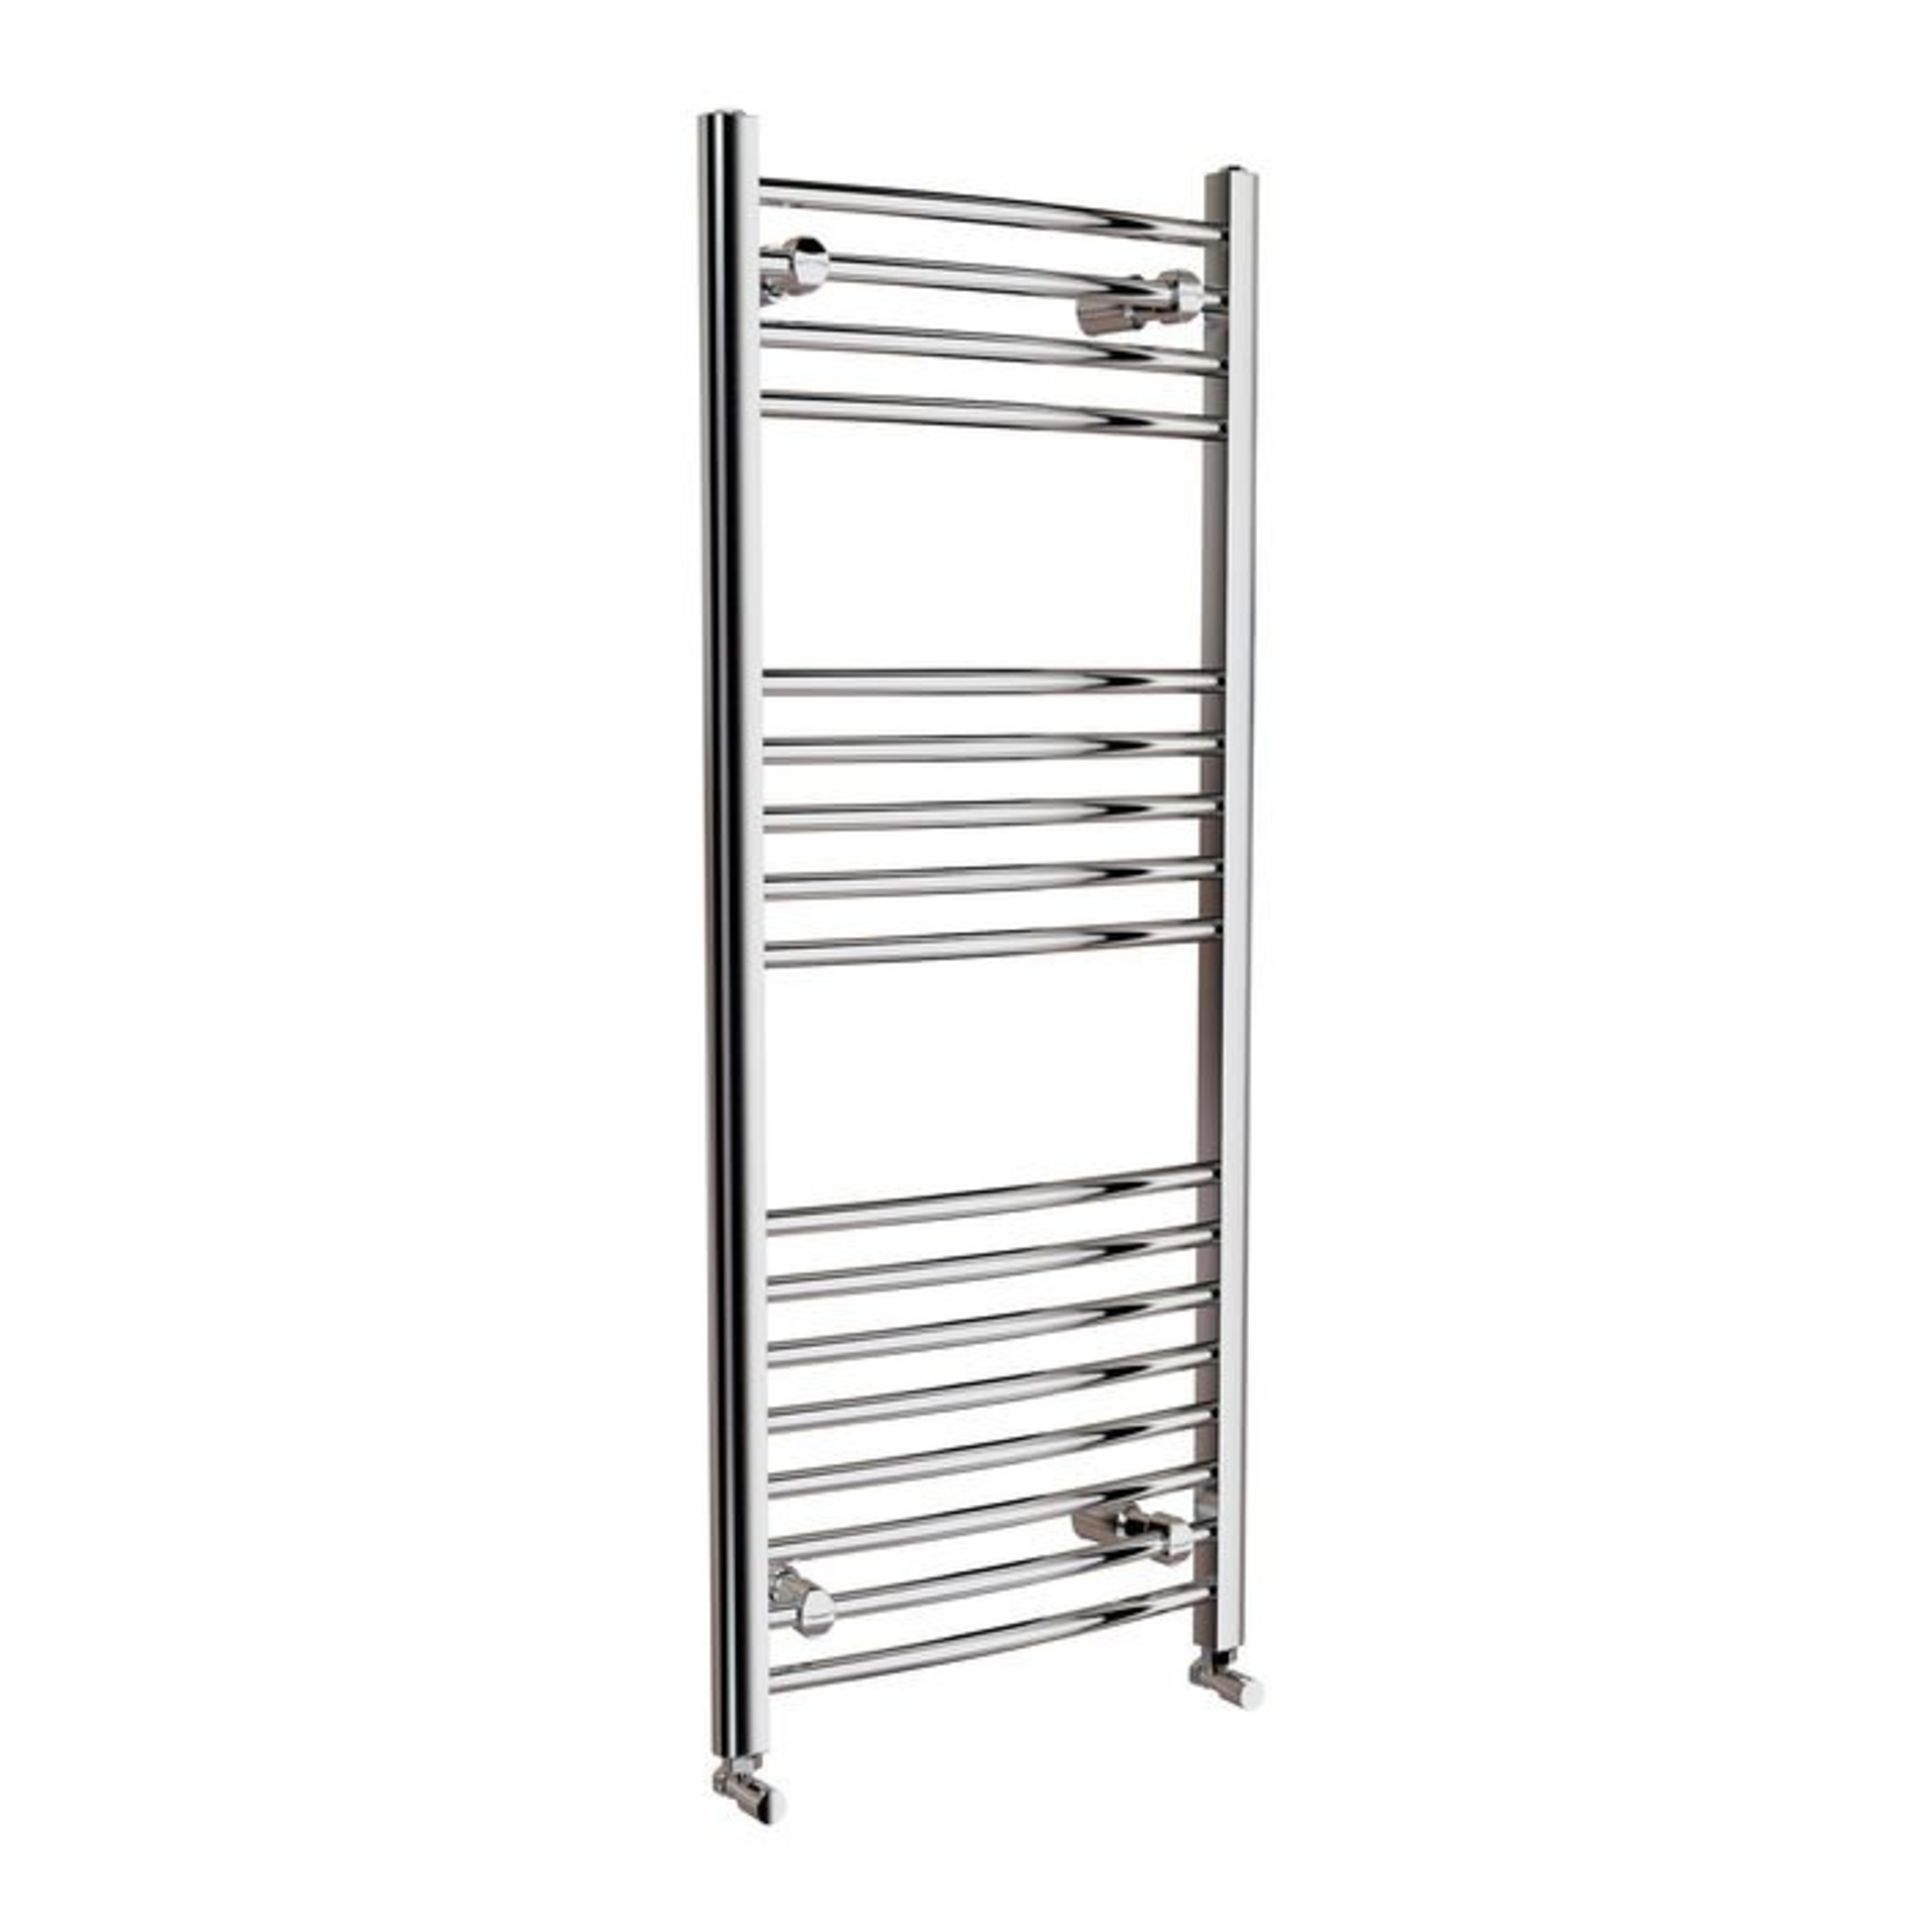 (M11) 1200x500mm - 20mm Tubes - Chrome Curved Rail Ladder Towel Radiator. Low carbon steel chrome - Image 3 of 5